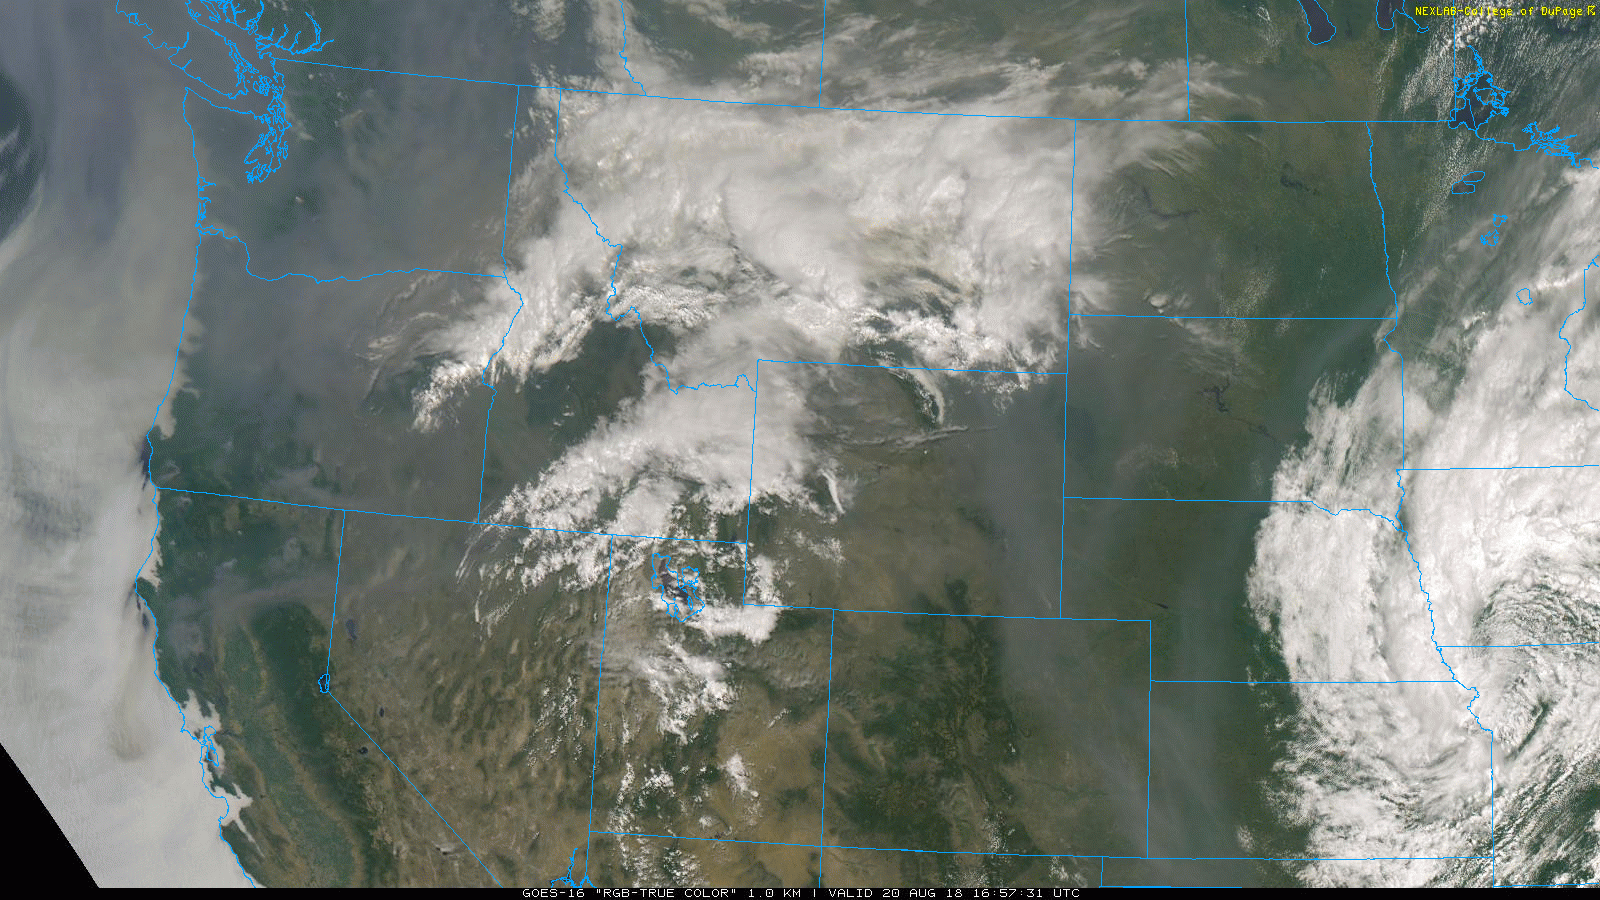 NW_GOES16_VisibleTrueColor_20180820_Fires